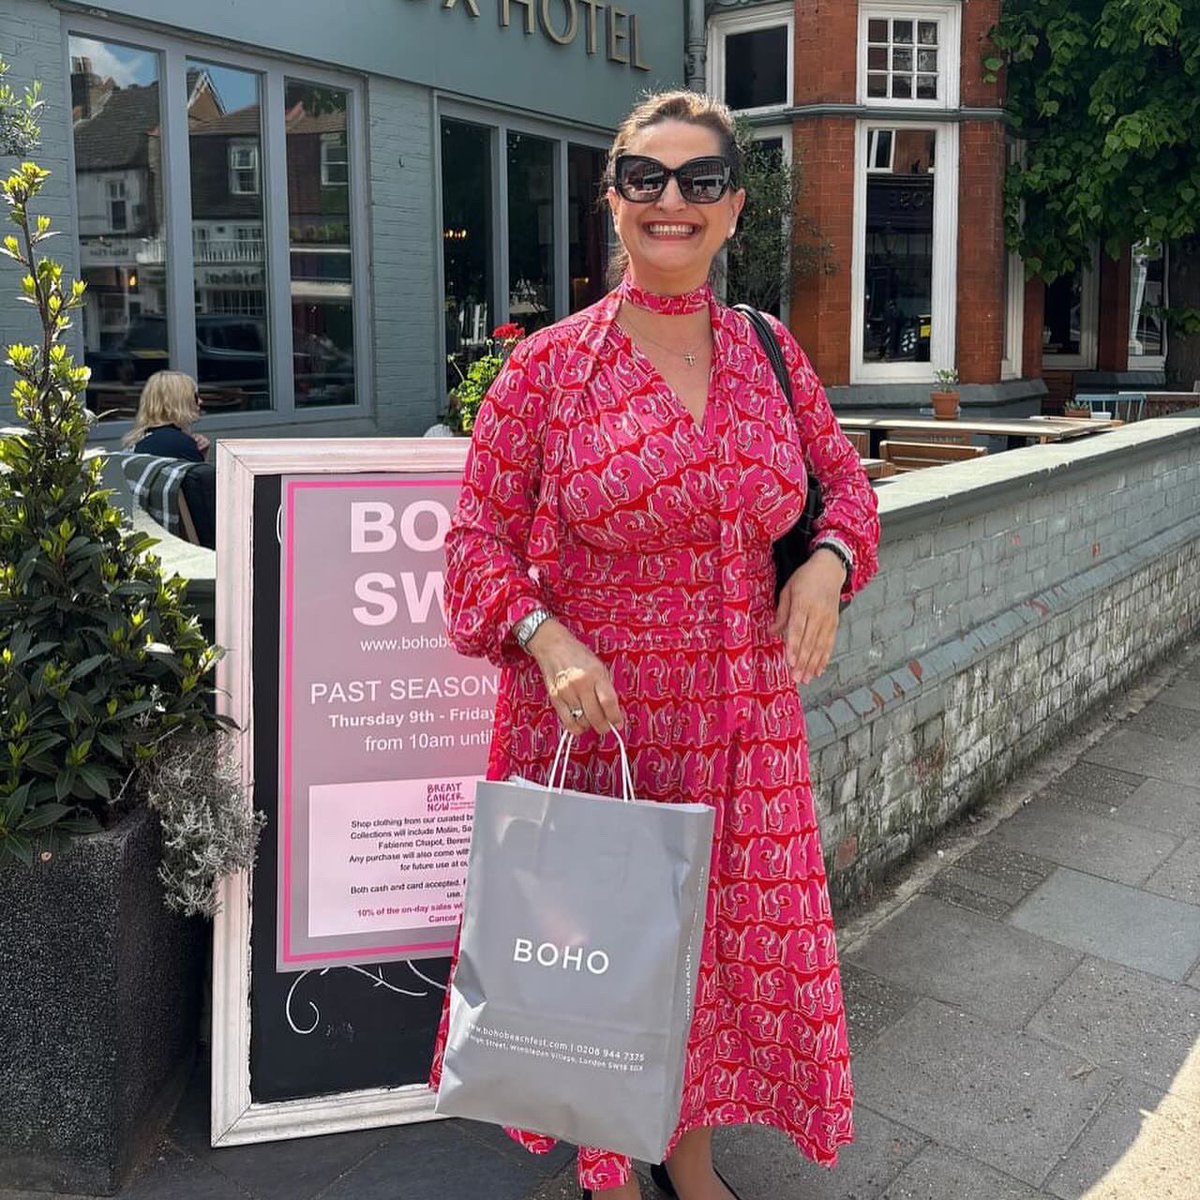 A reminder that the fab folk from Boho Beach Fest are hosting their sale again today in the Coach House!👗 Pop in and grab a stylish bargain!🥰

#youngspubs #wimbledon #dogandfox #wimblesonvillage #coachhouse